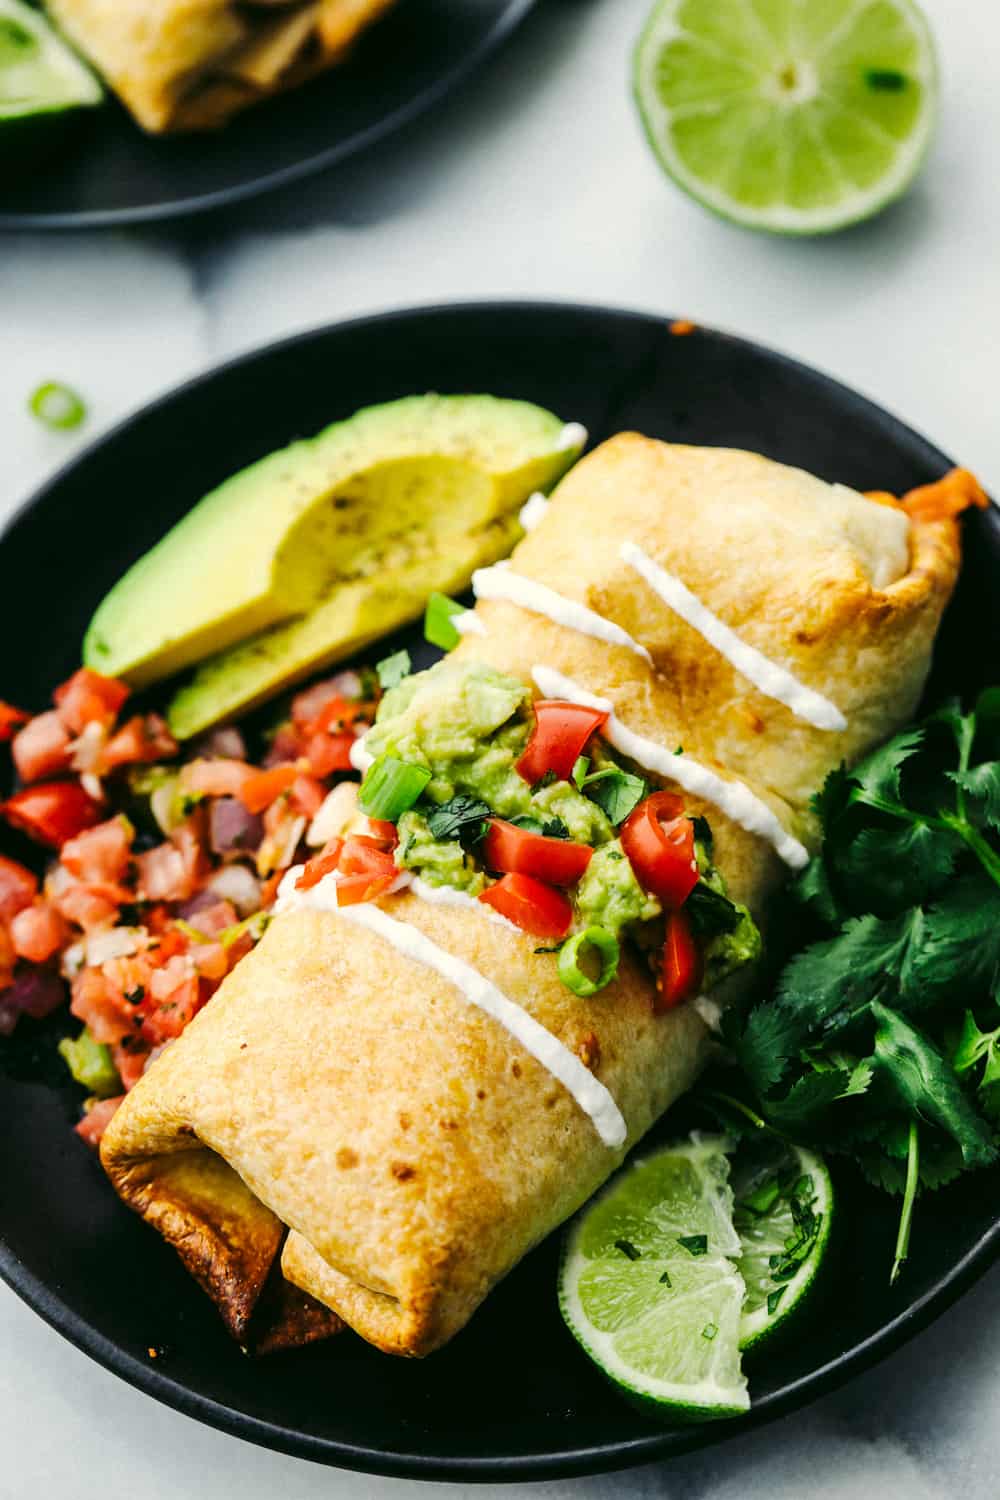 Homemade Chicken Chimichangas (Baked or Pan Fried!) - Yummy Recipe